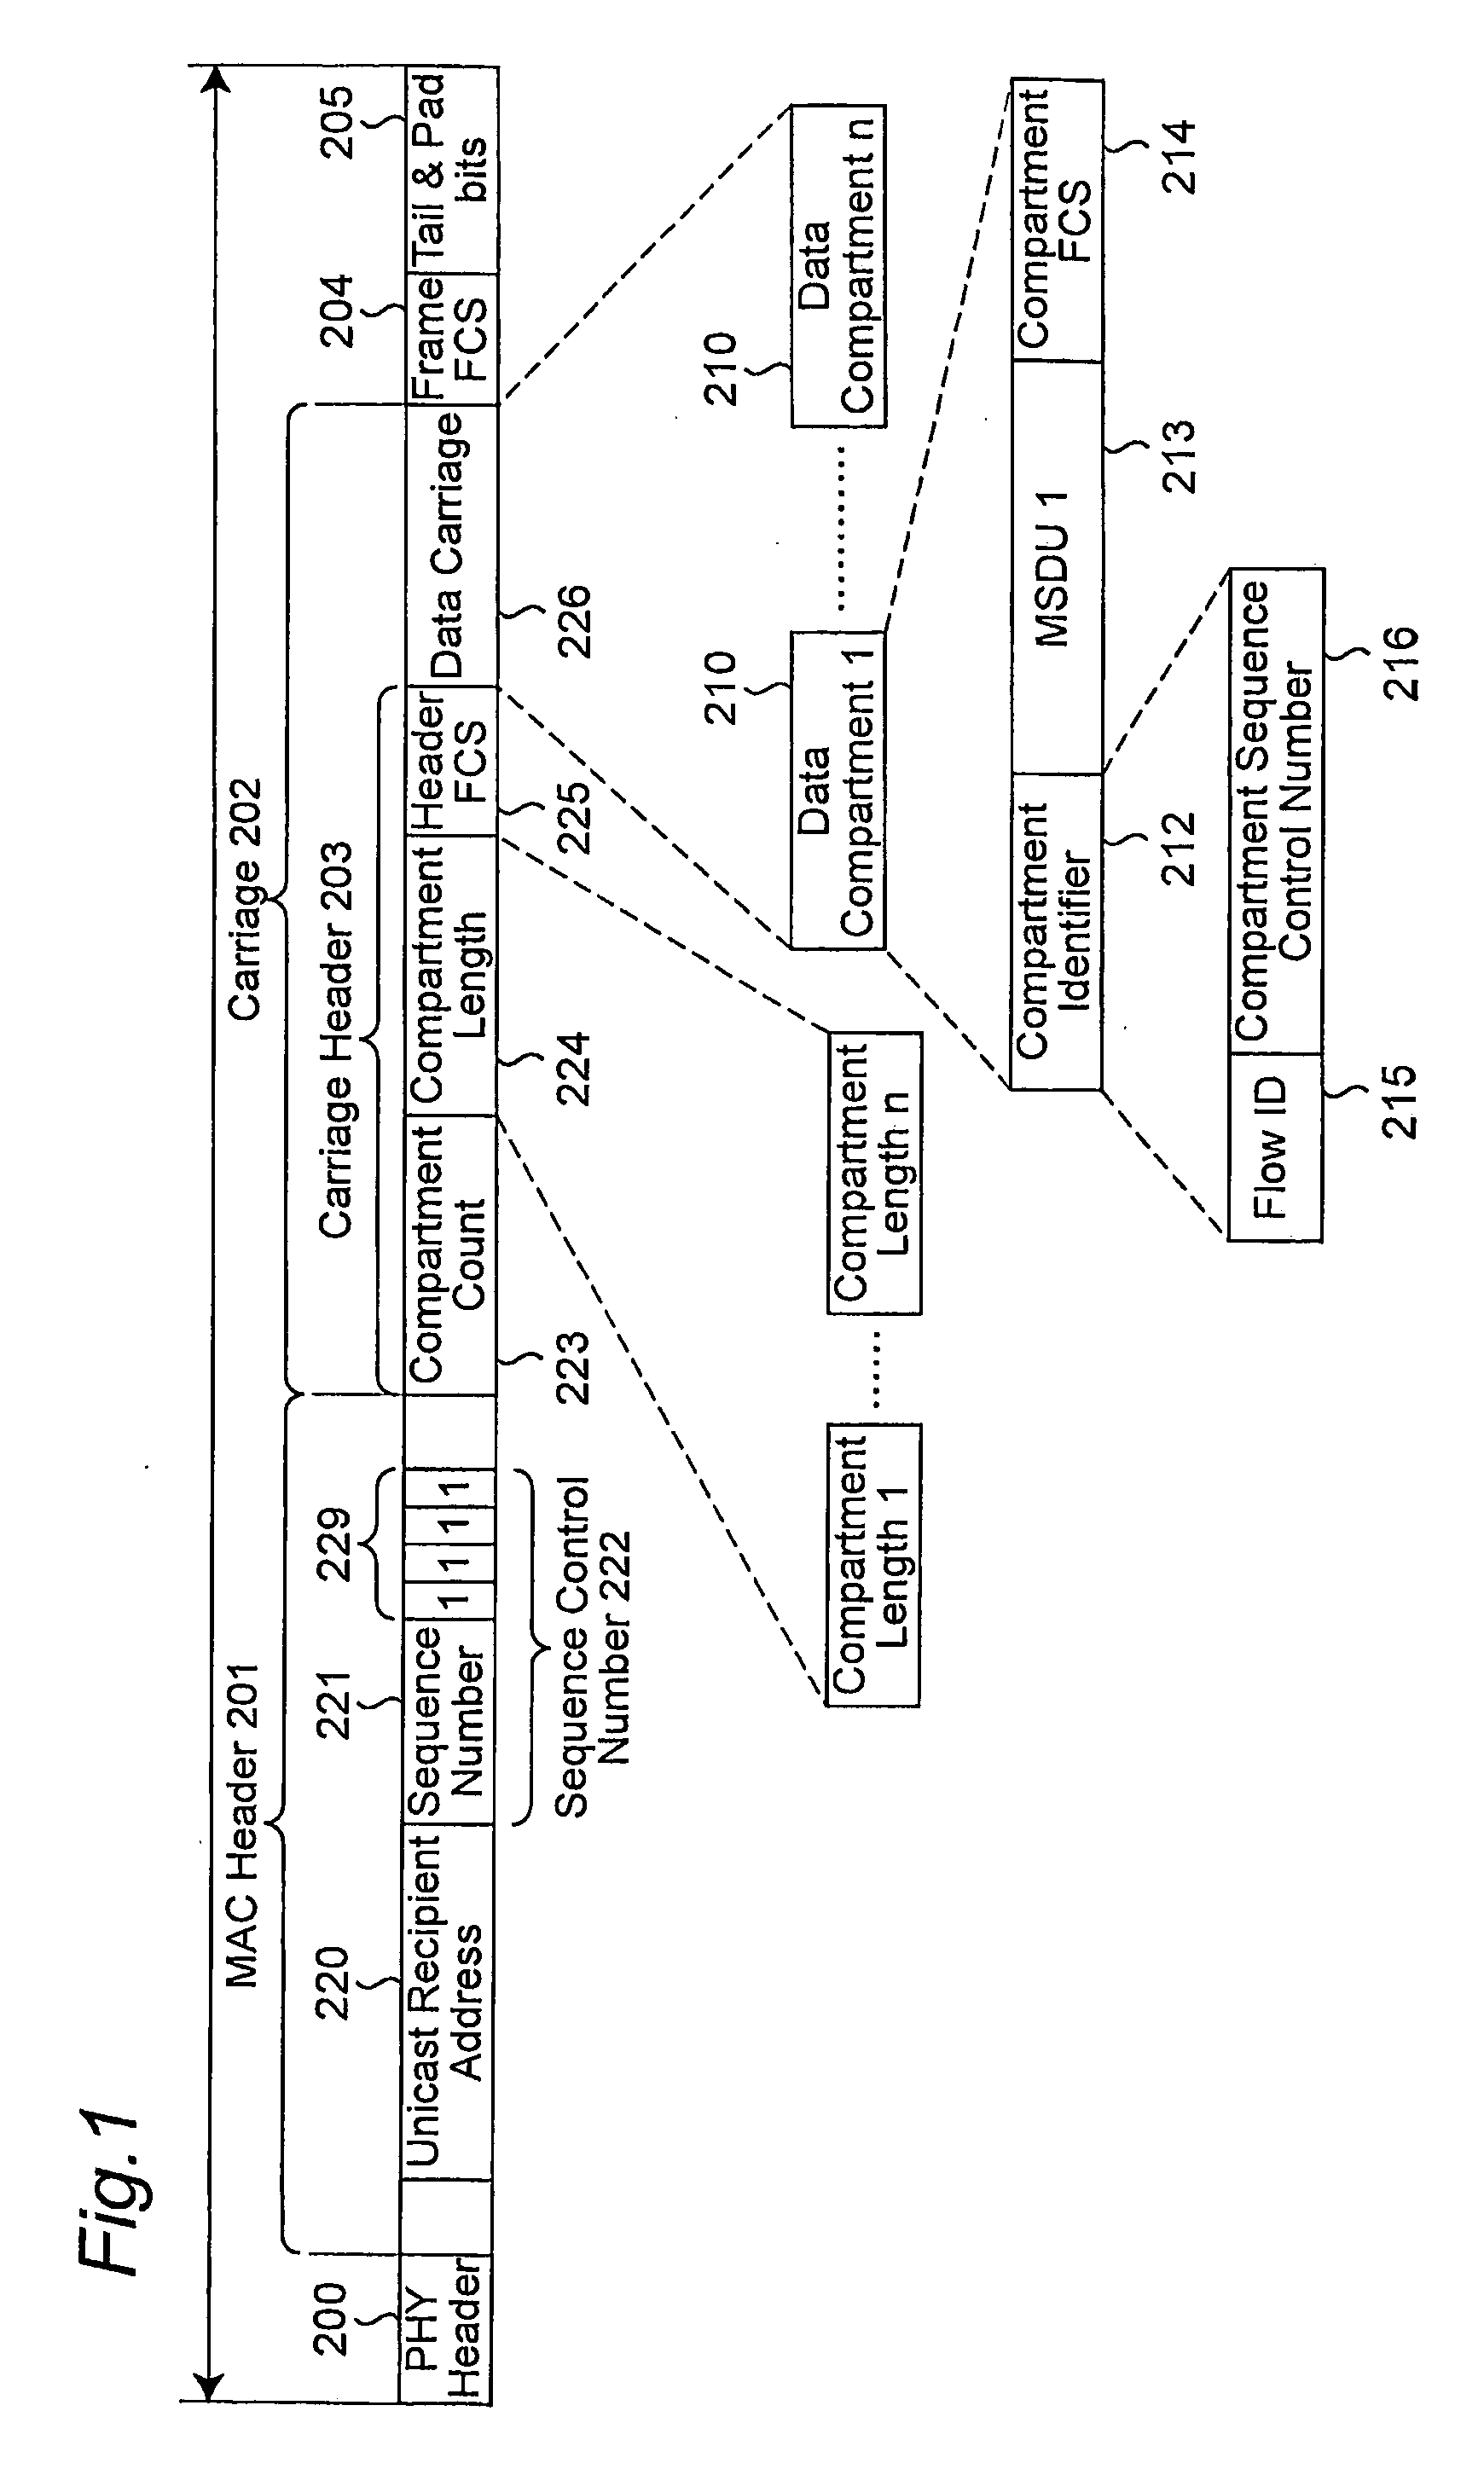 Method And Apparatus For Generating Packet Frames For Carrying Data